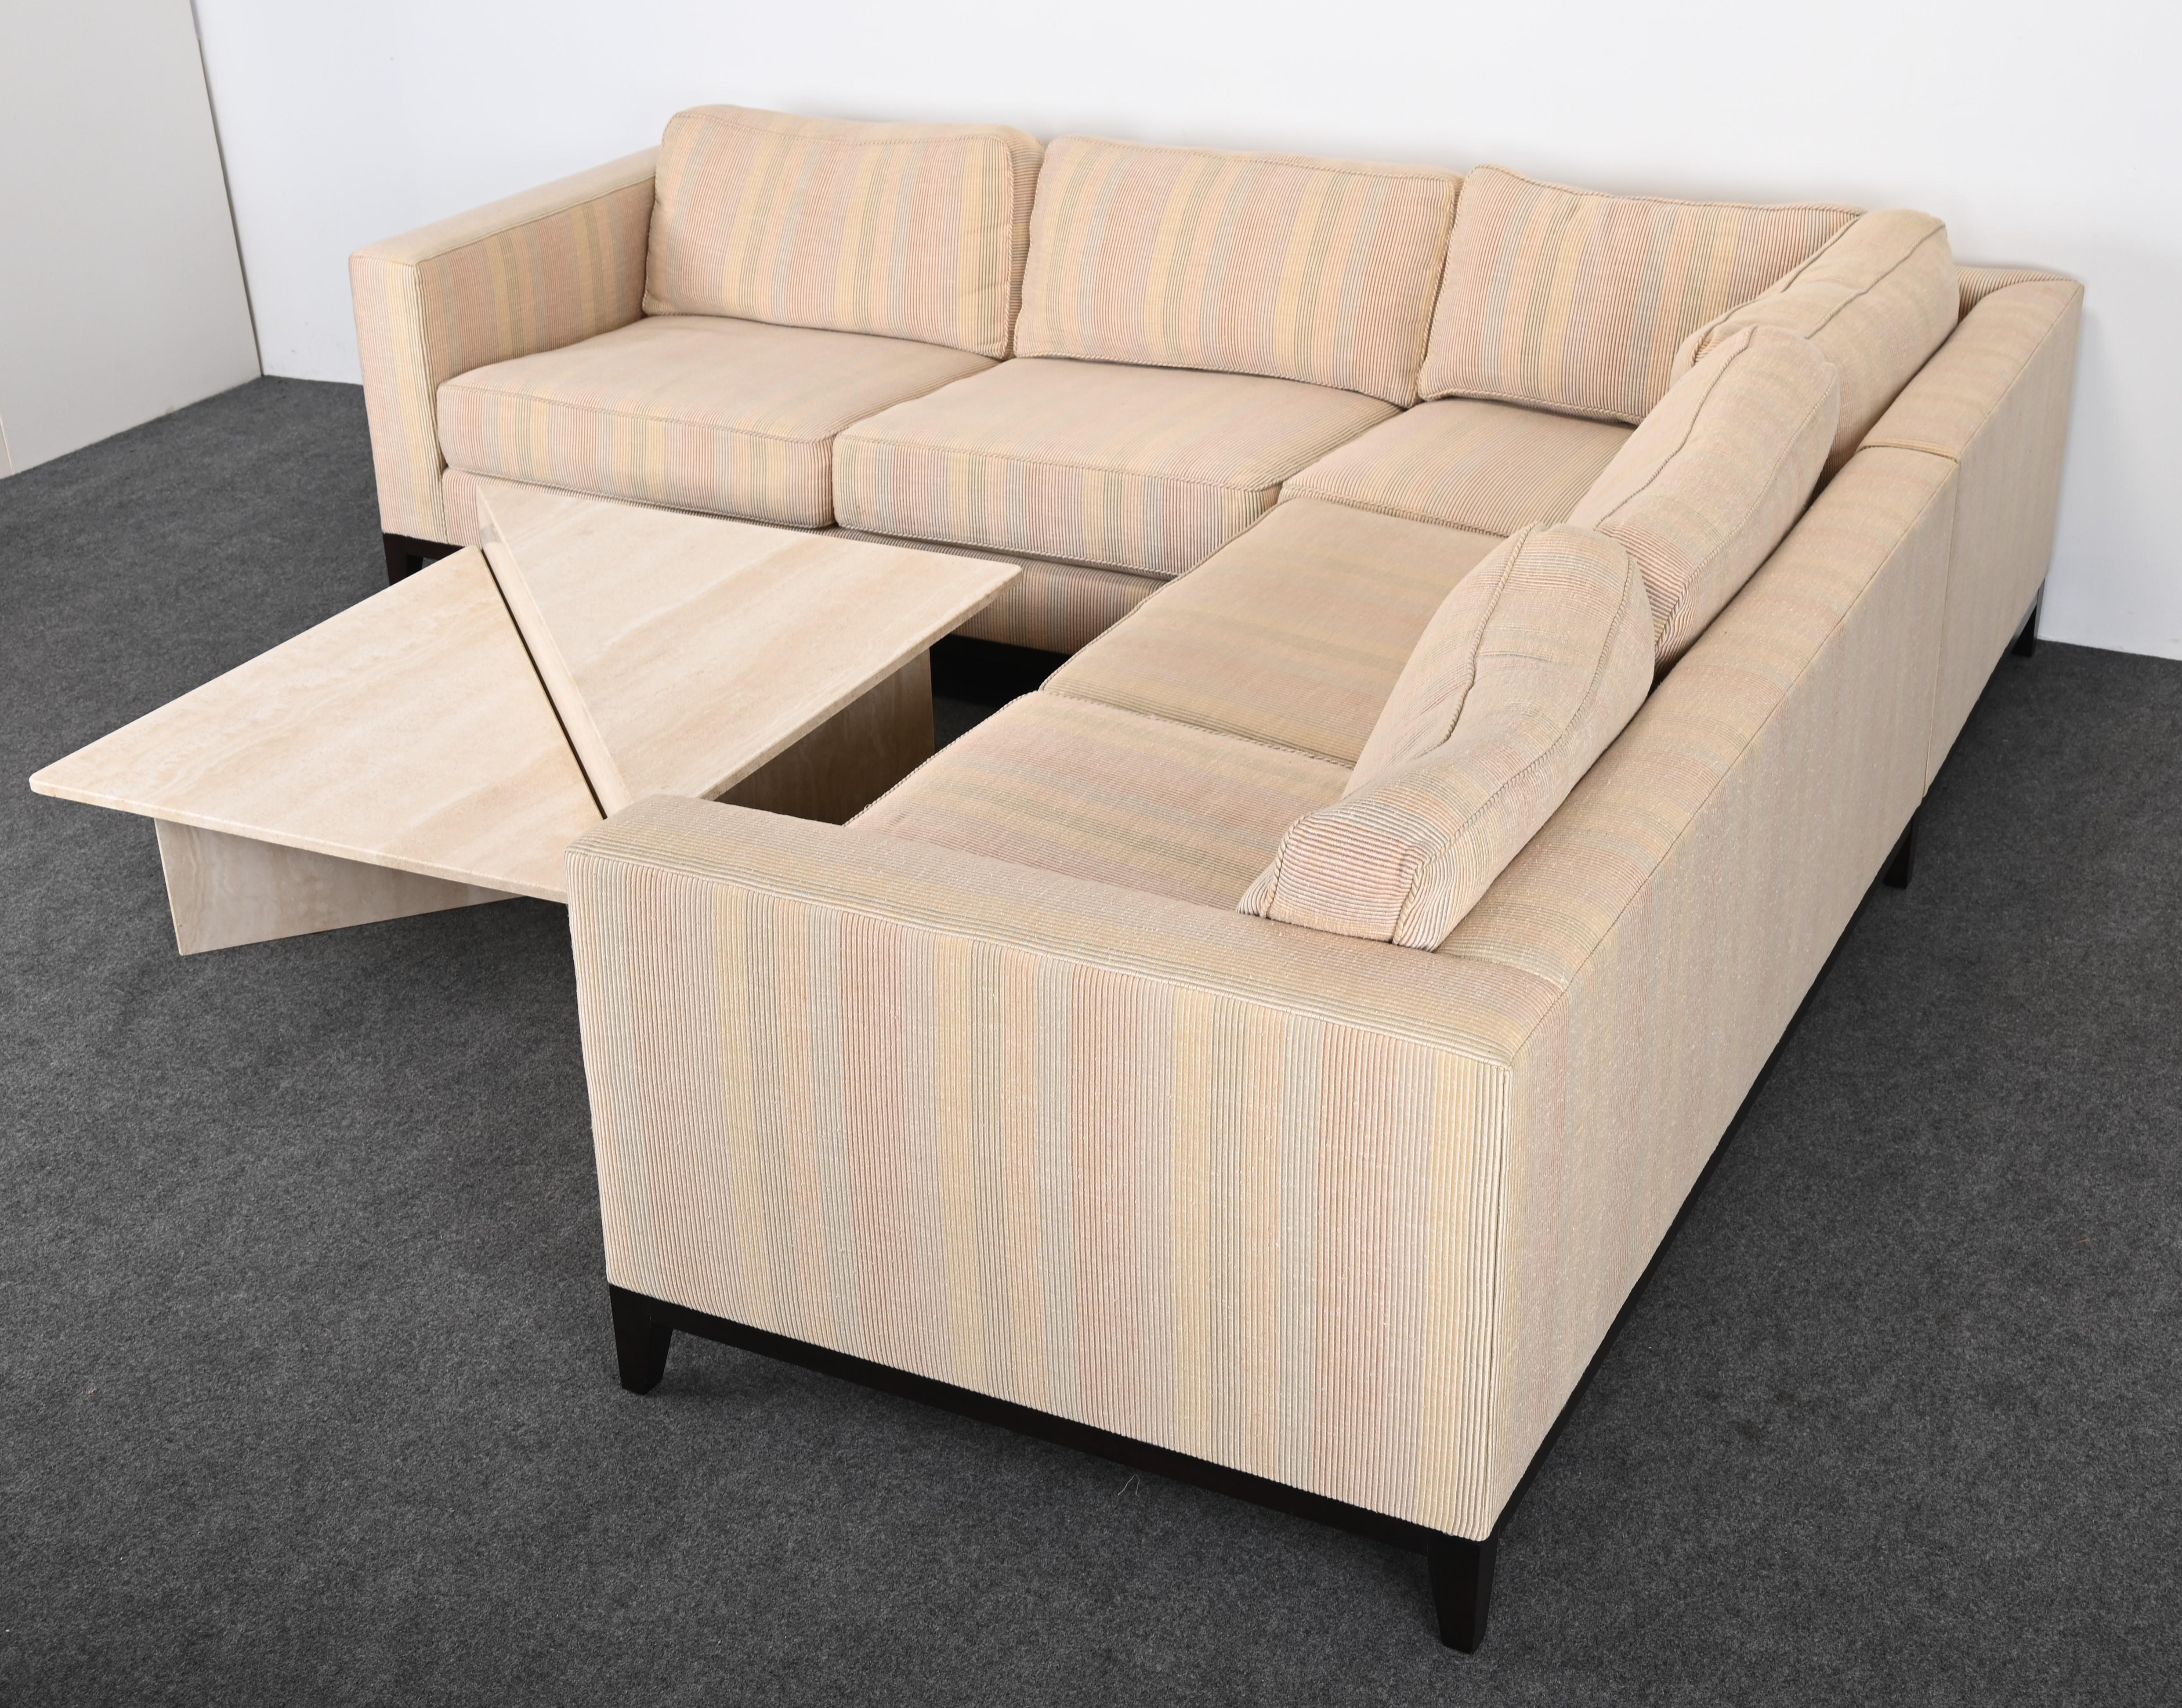 Modern Designer Sectional Sofa by Christian Liaigre at Holly Hunt, 21st Century